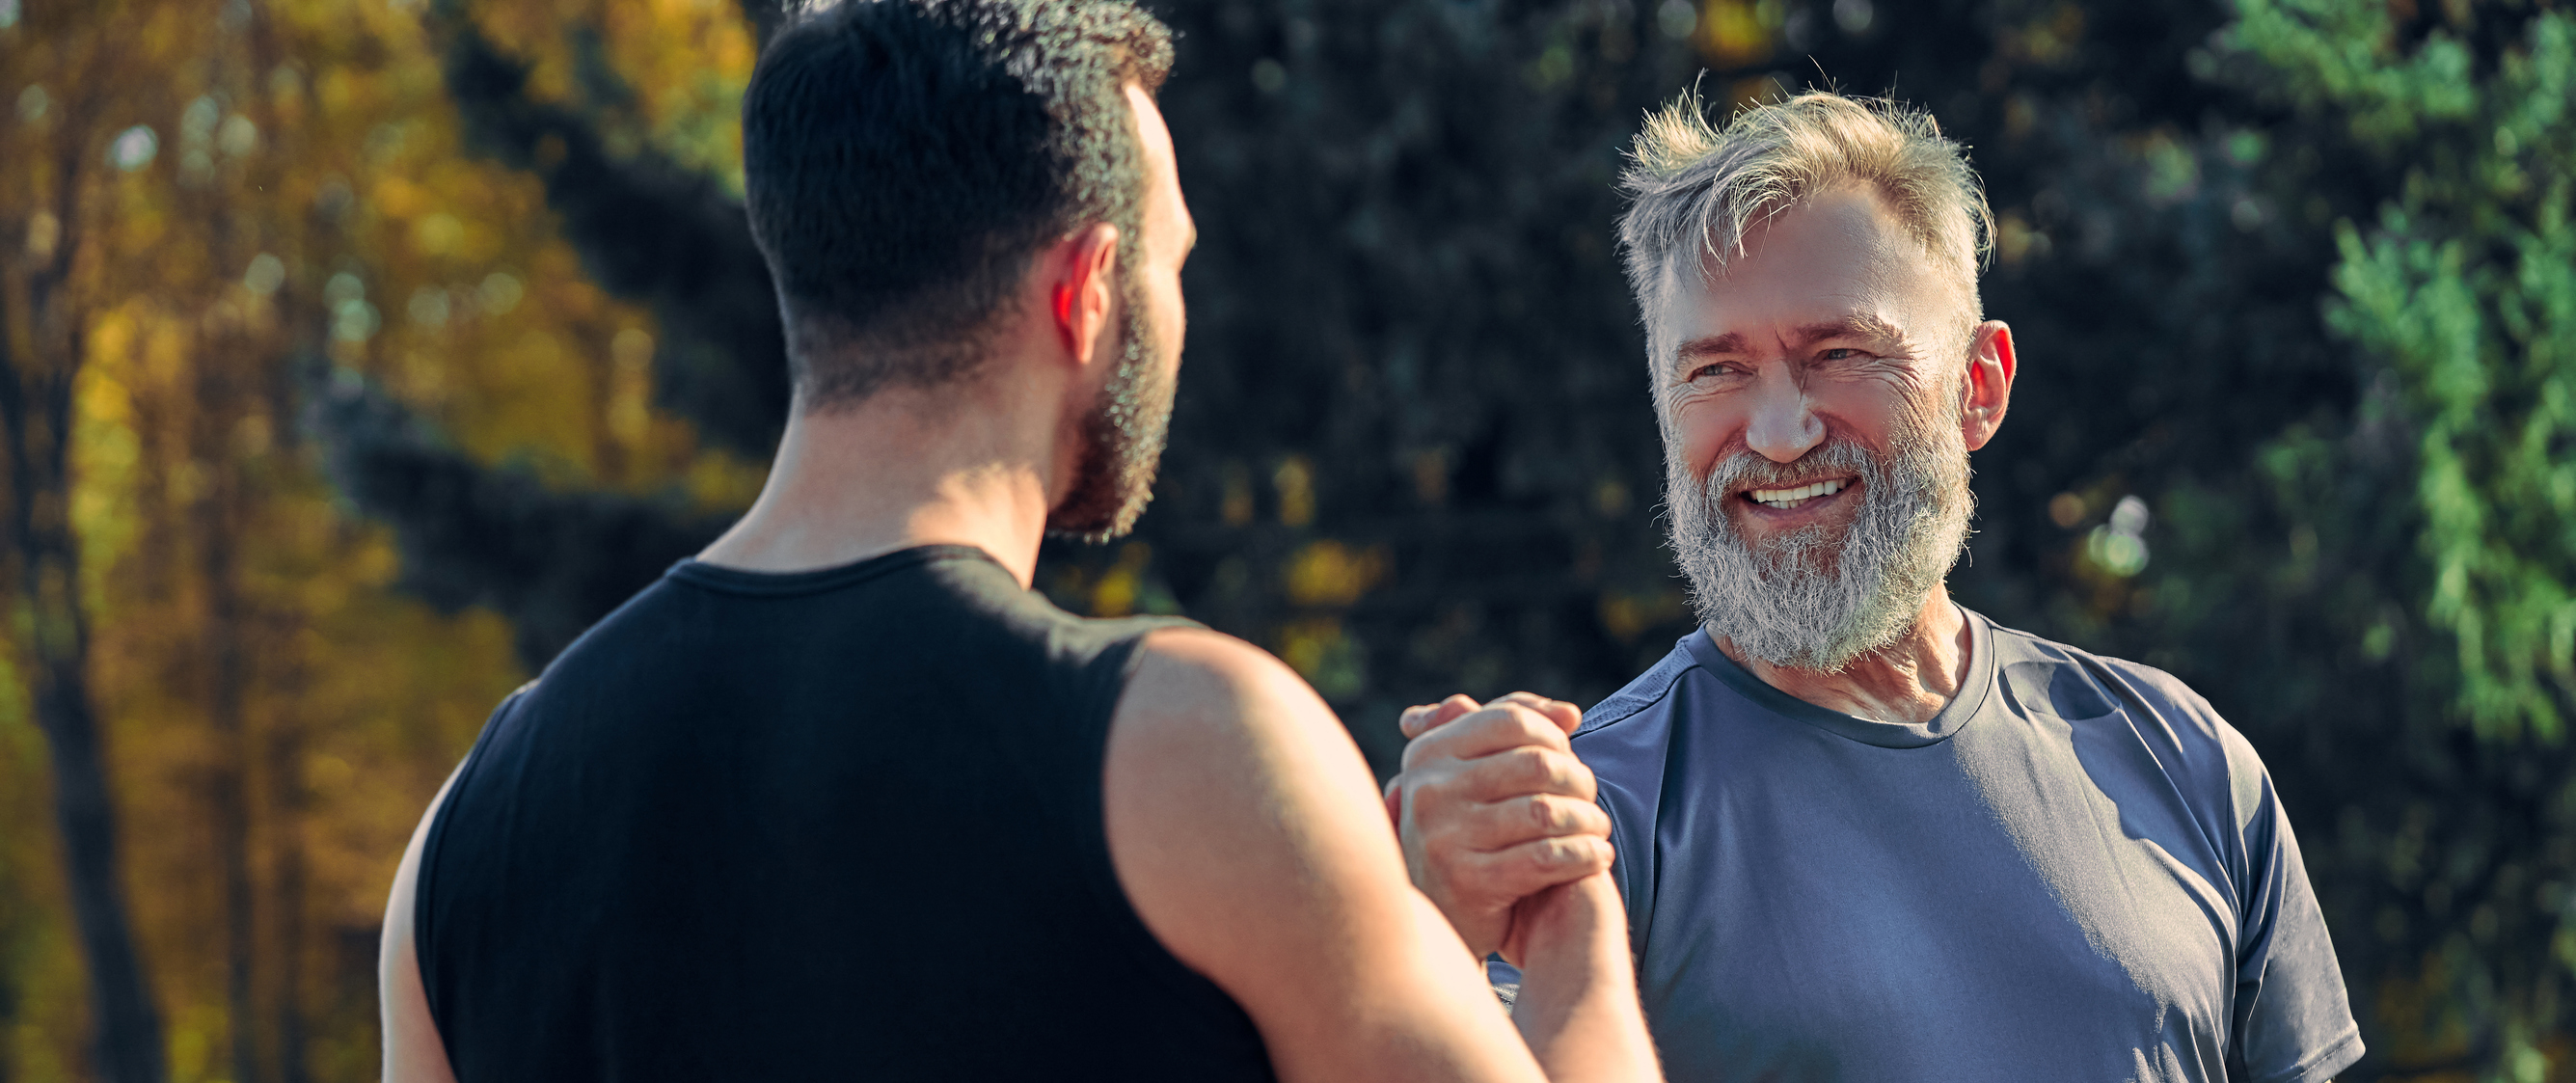 Long-term conditions - Image of two happy different aged sportsmen greeting each other outdoors